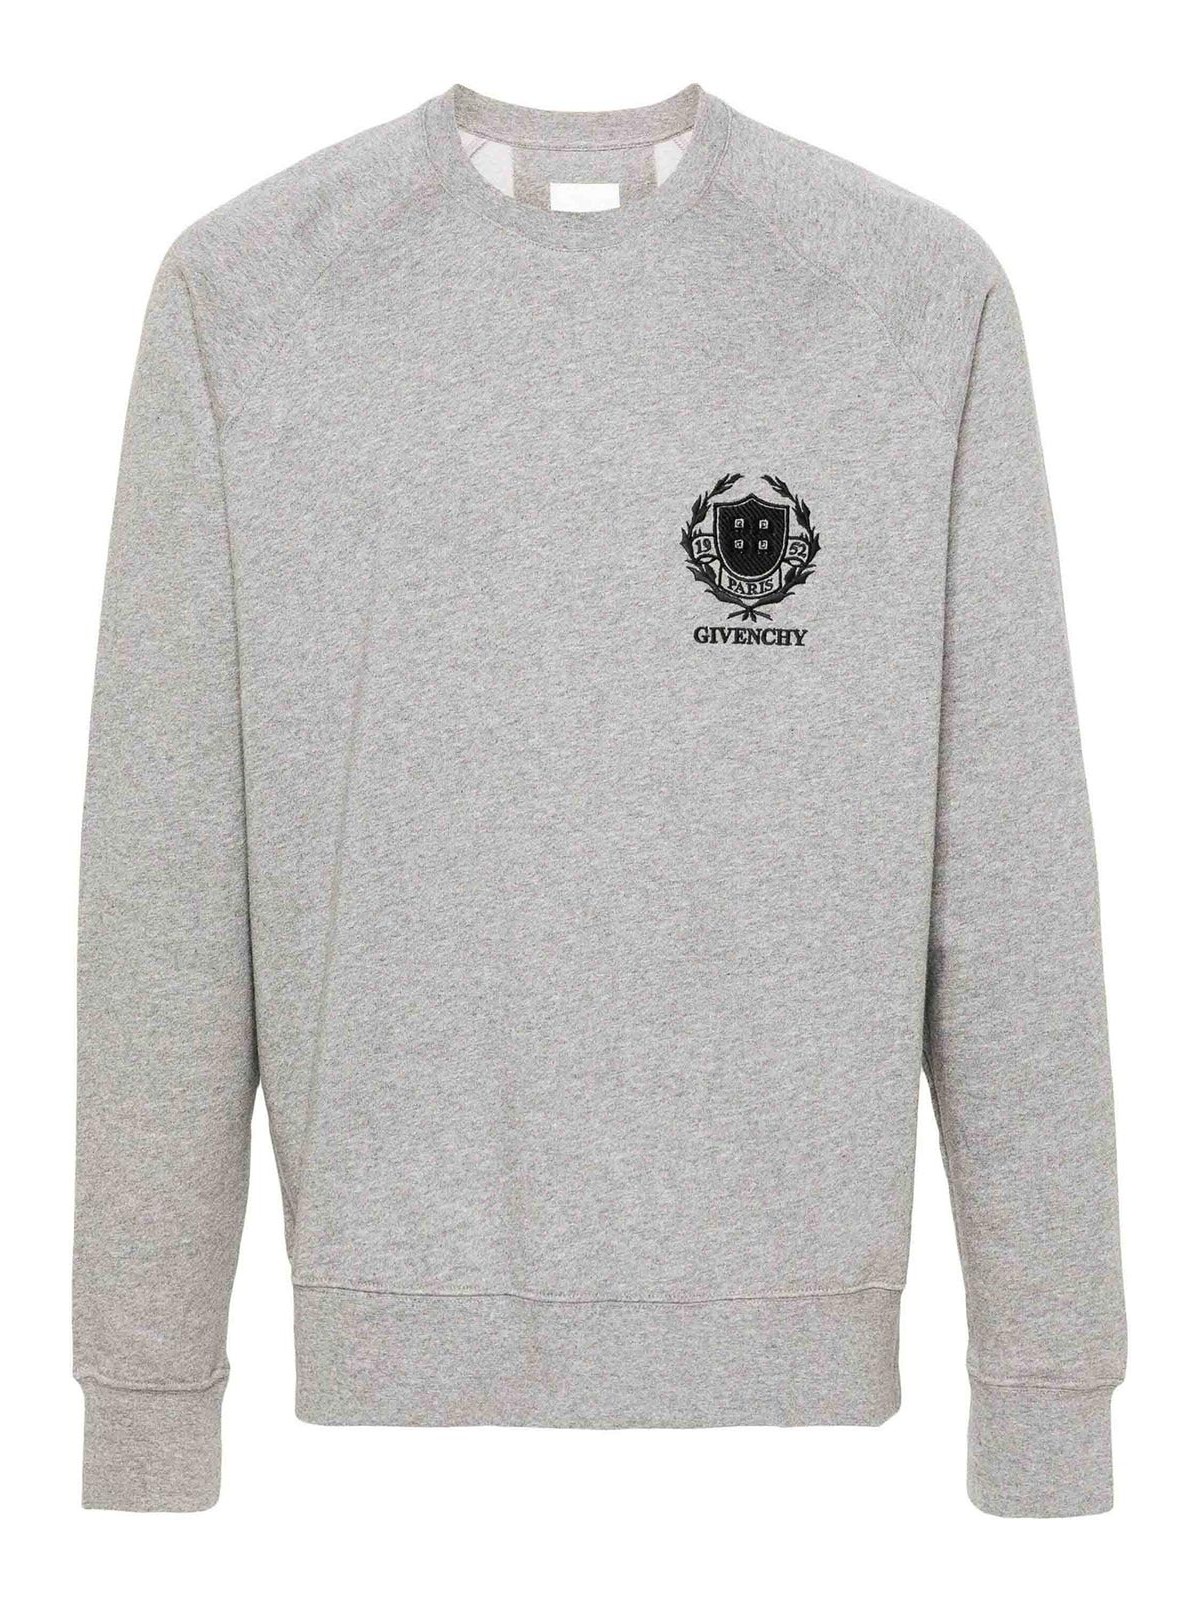 Givenchy Crest Slim Fit Sweatshirt In Gray